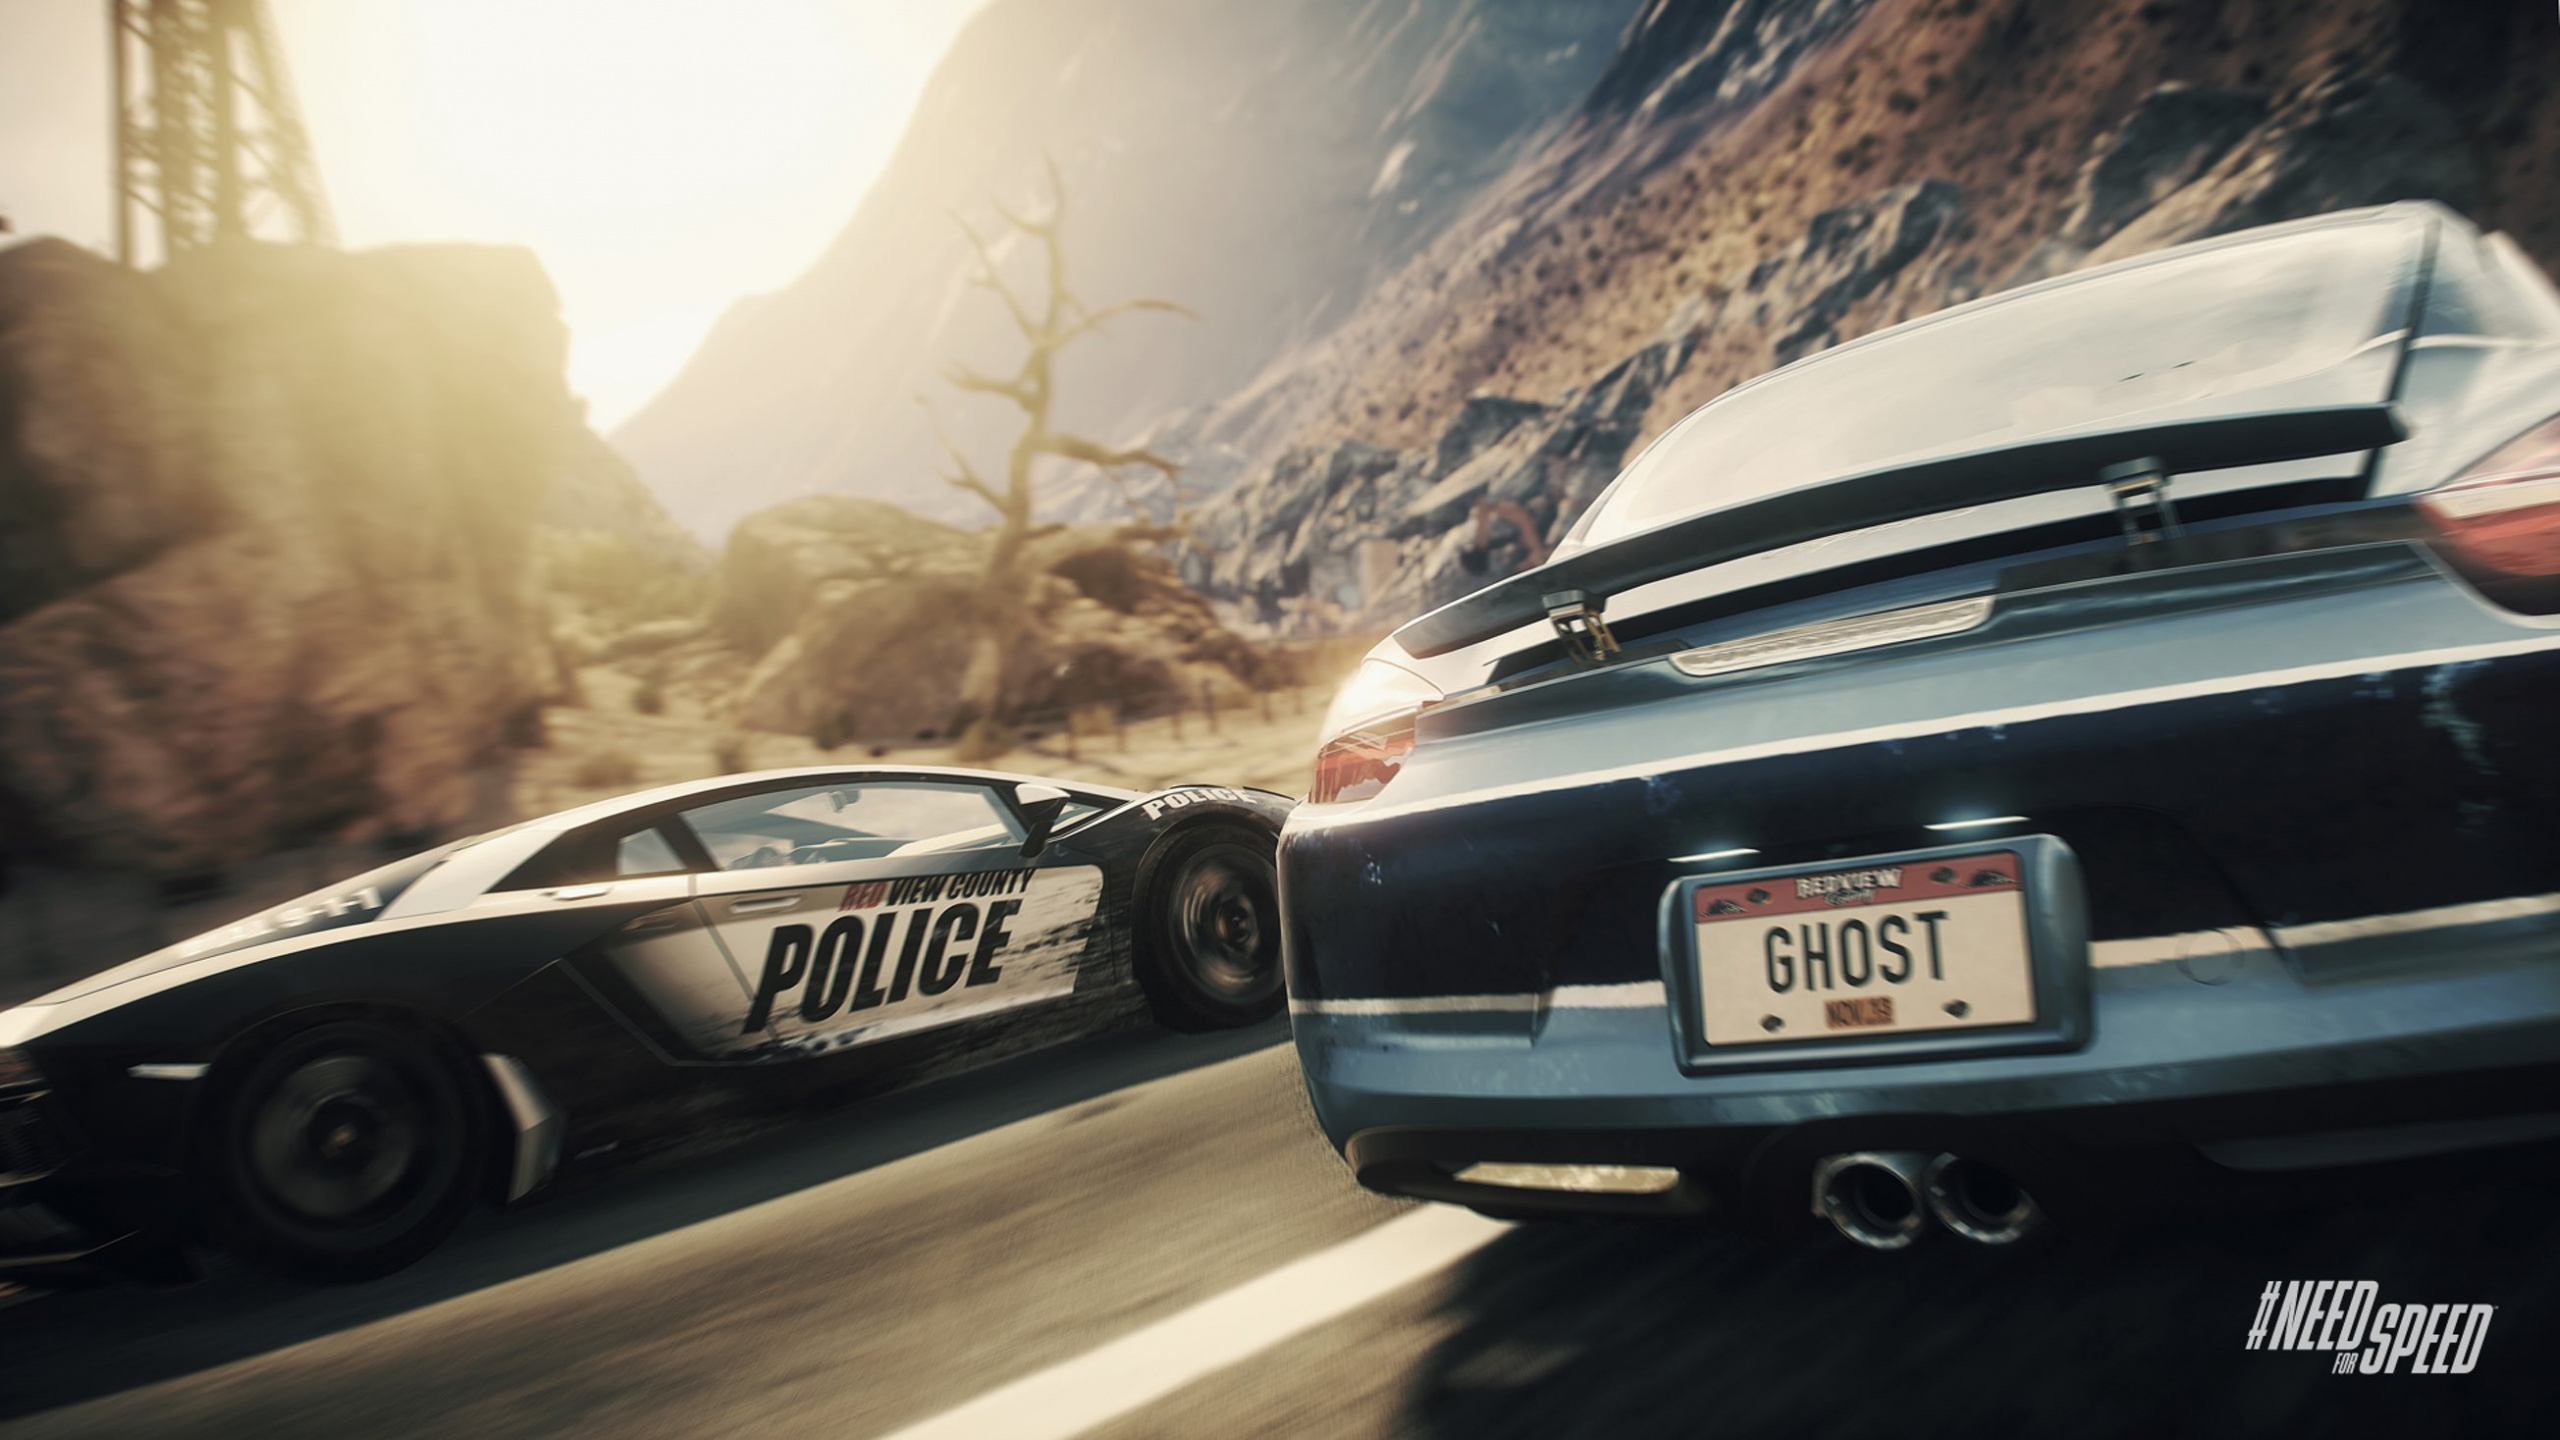 Нид фор спид пс. Need for Speed Rivals. NFS Rivals 4к. Гонки need for Speed.